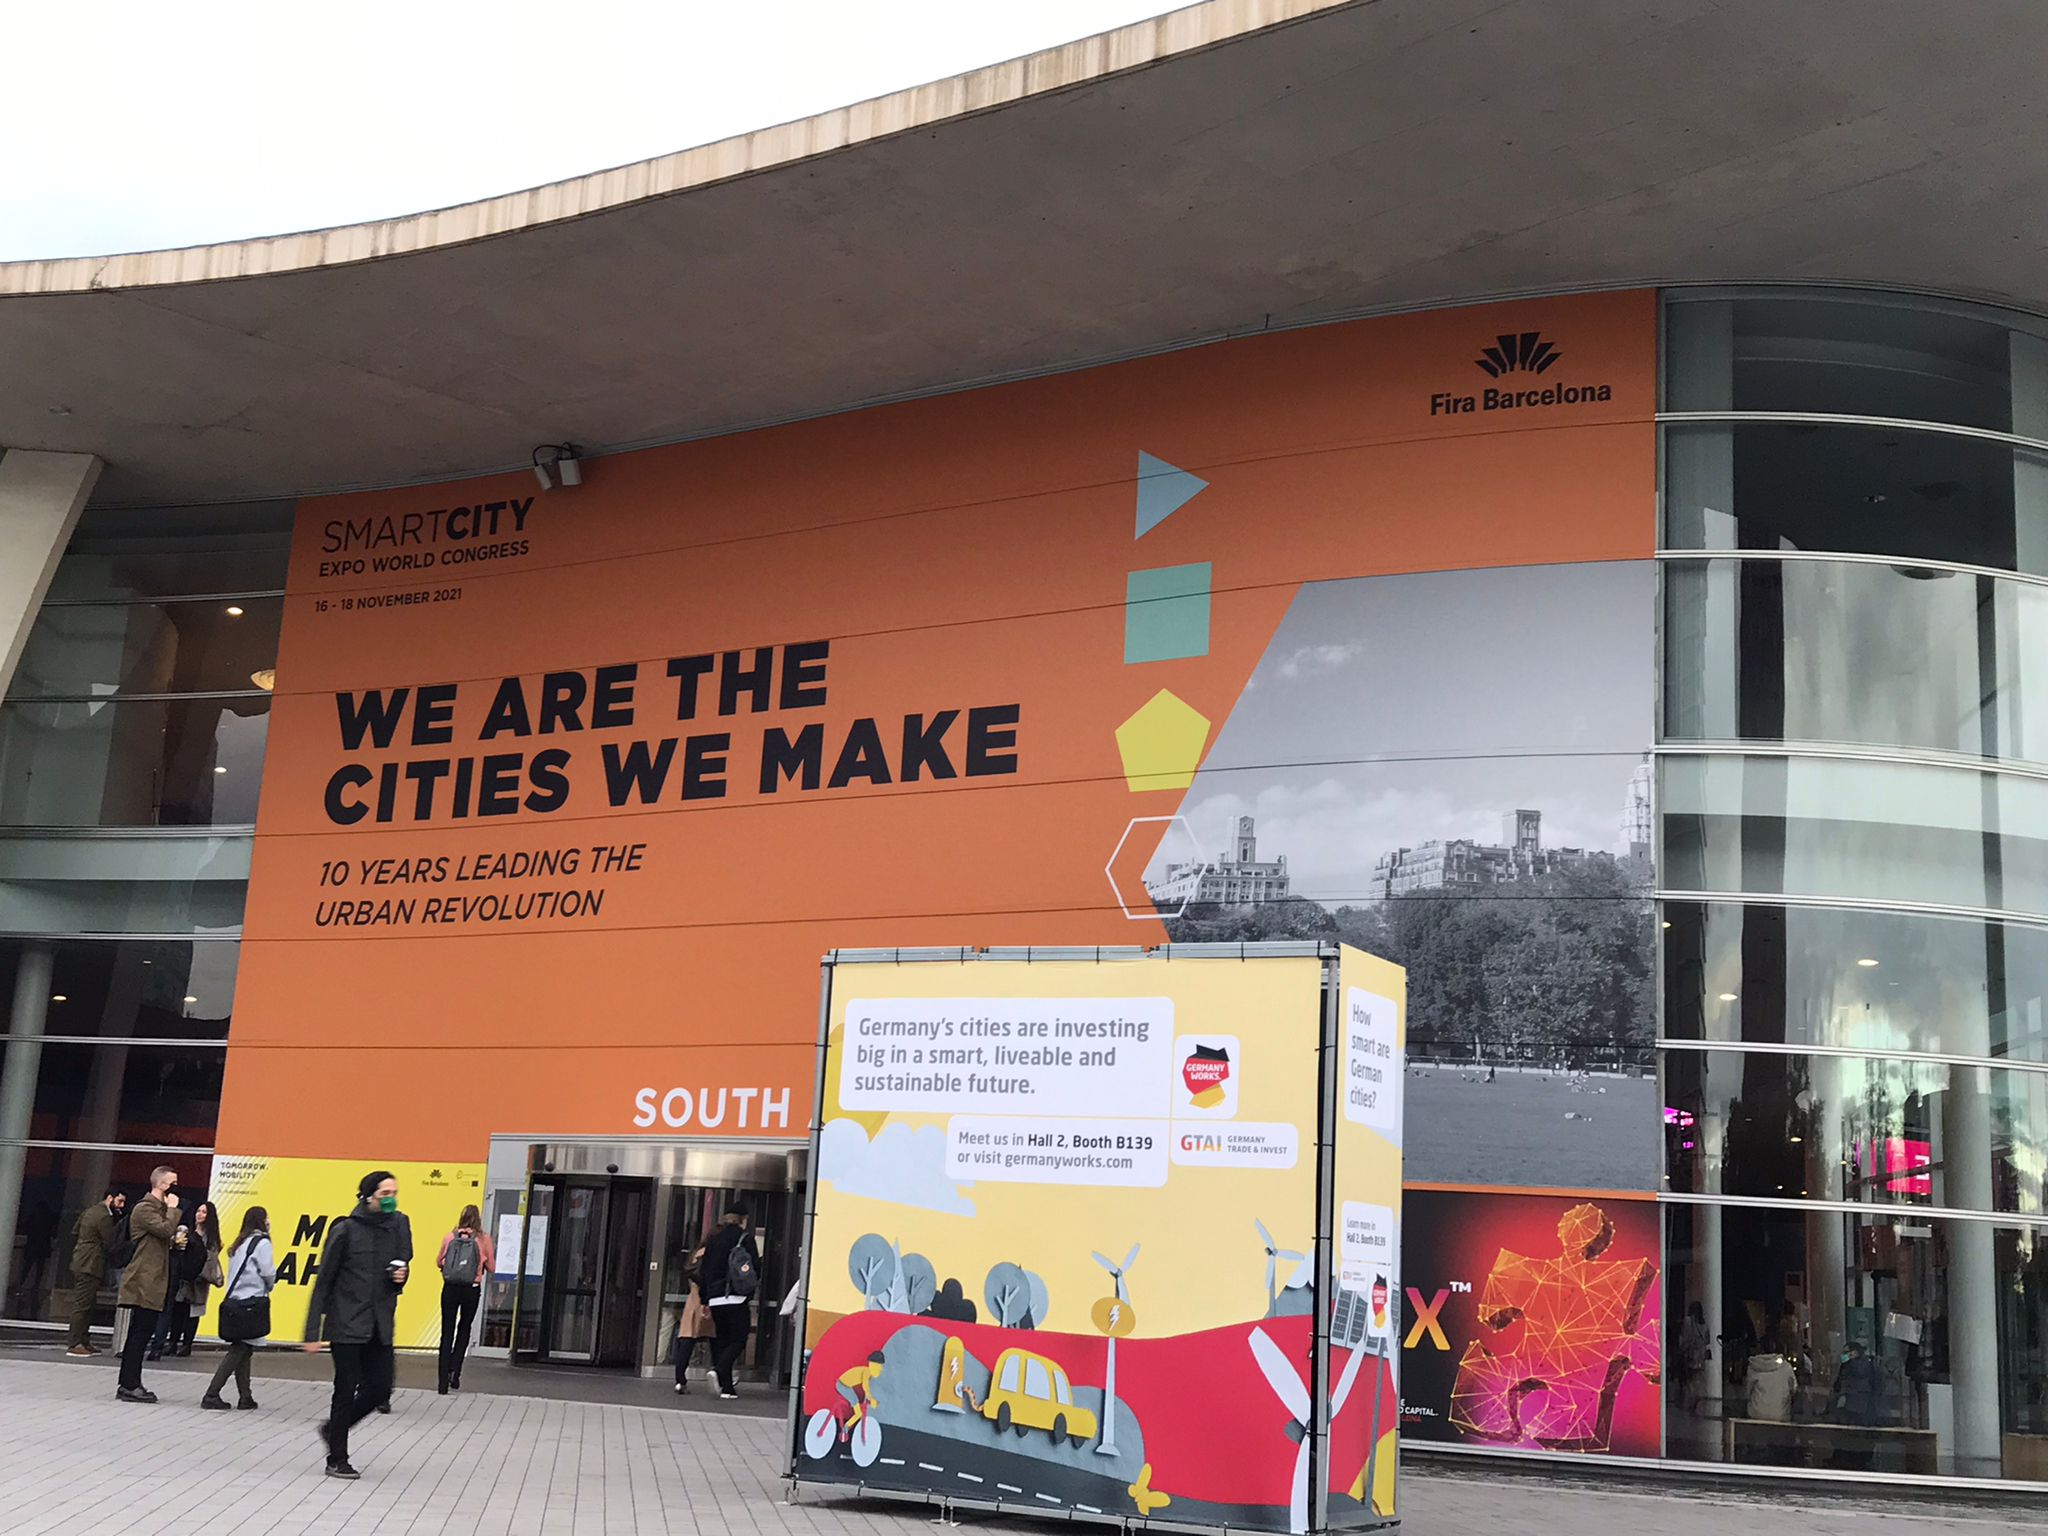 The entrance of the international congress Smart City Expo